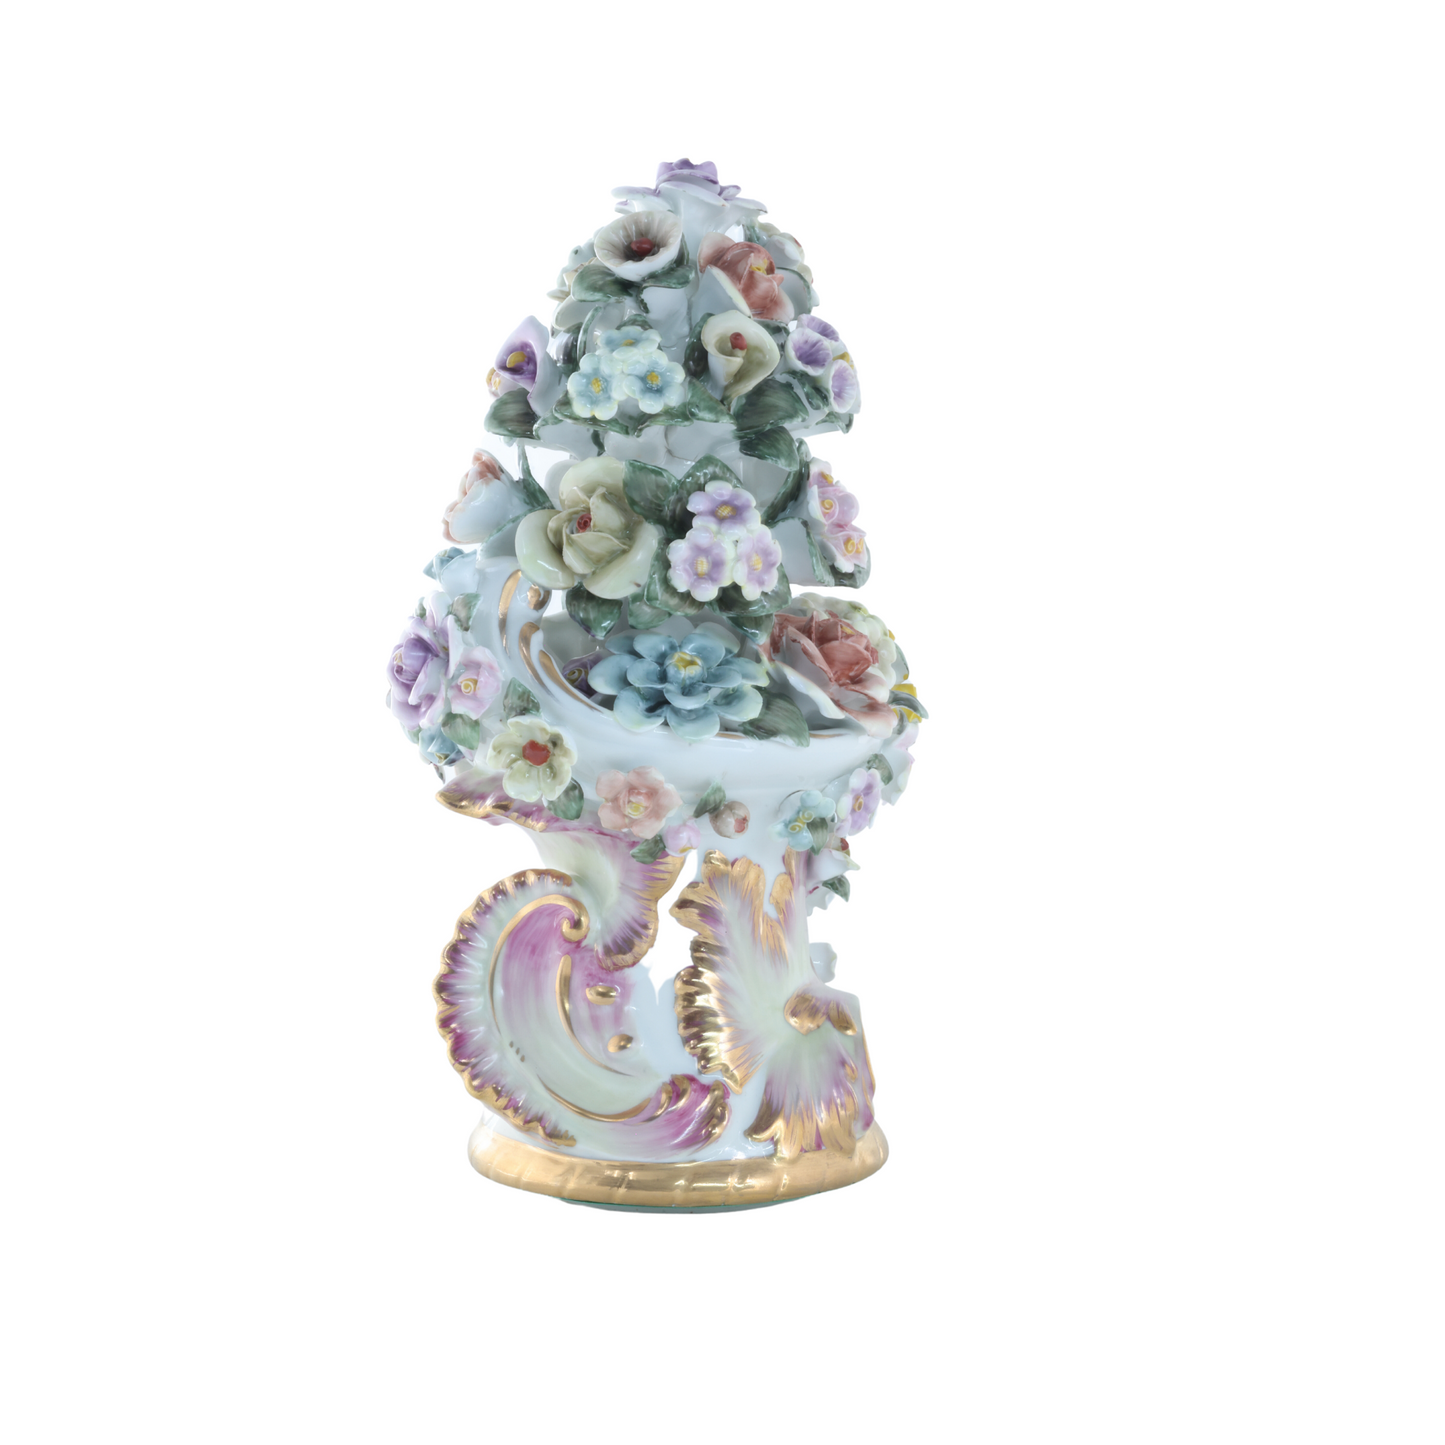 Three Dimensional Hand-painted Louis XV Style Porcelain Flower Urn